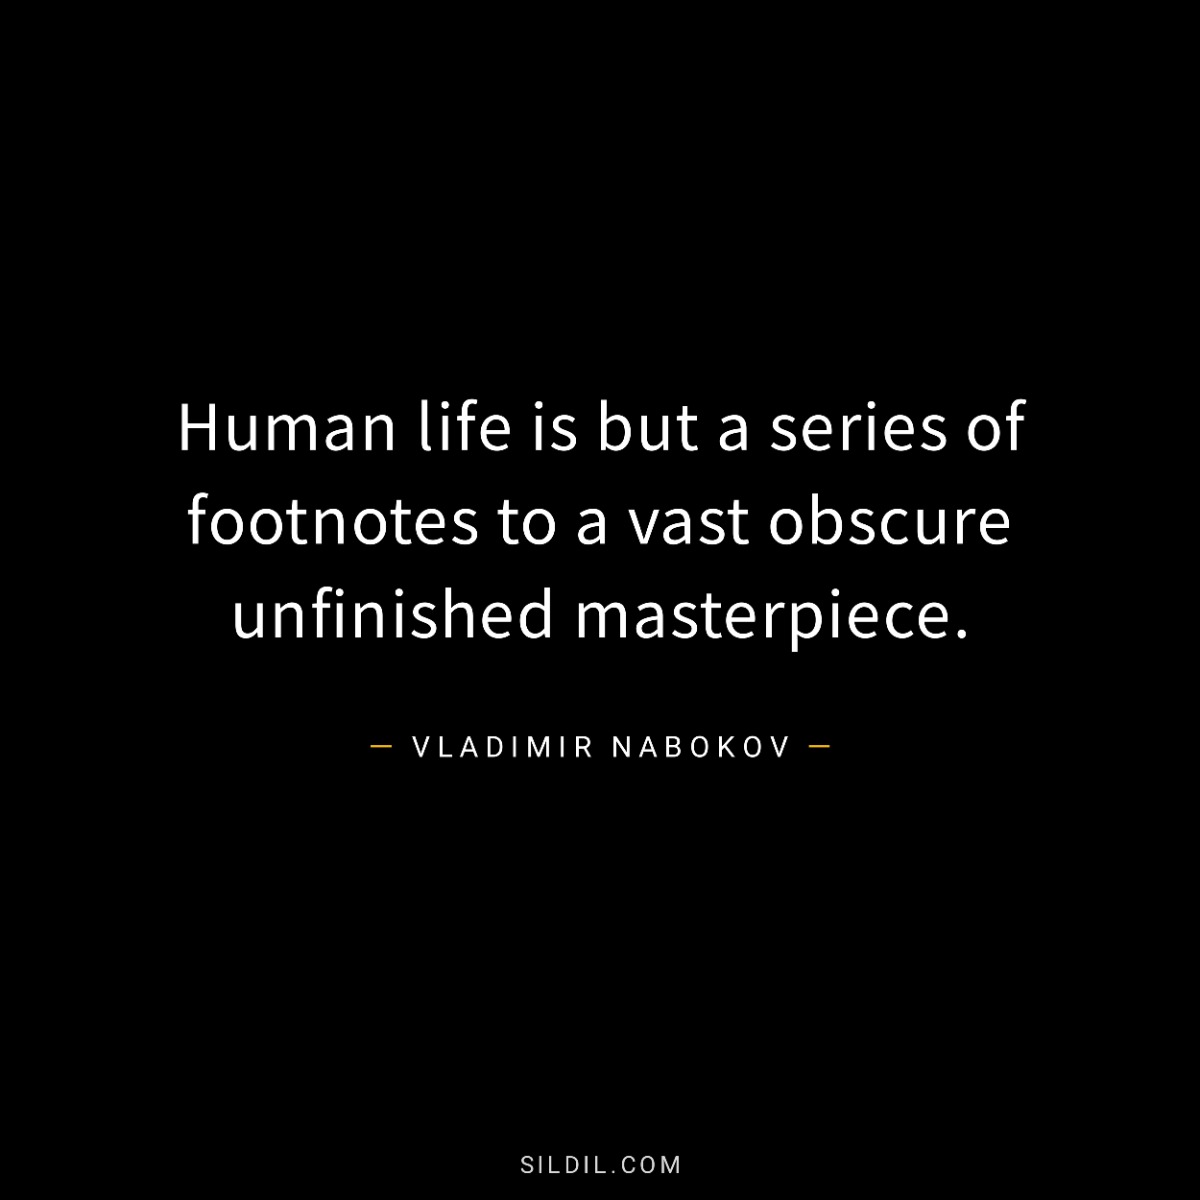 Human life is but a series of footnotes to a vast obscure unfinished masterpiece.